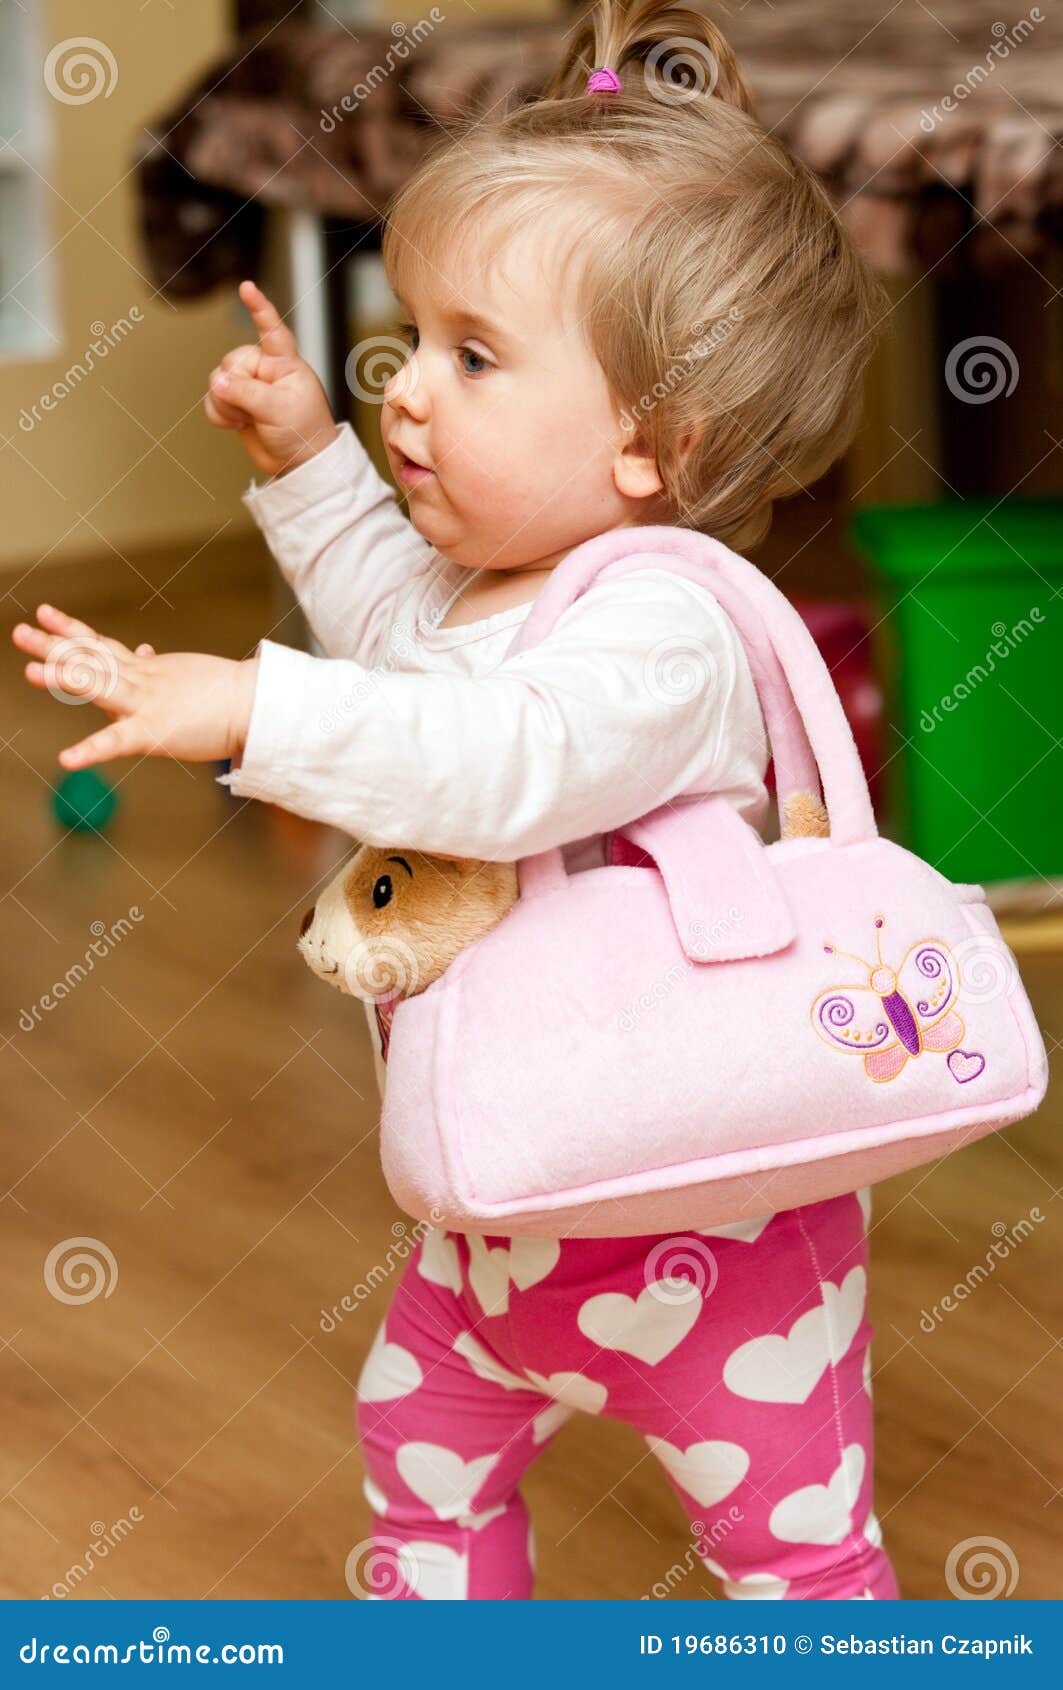 Little Girl With Purse Stock Photo - Image: 19686310